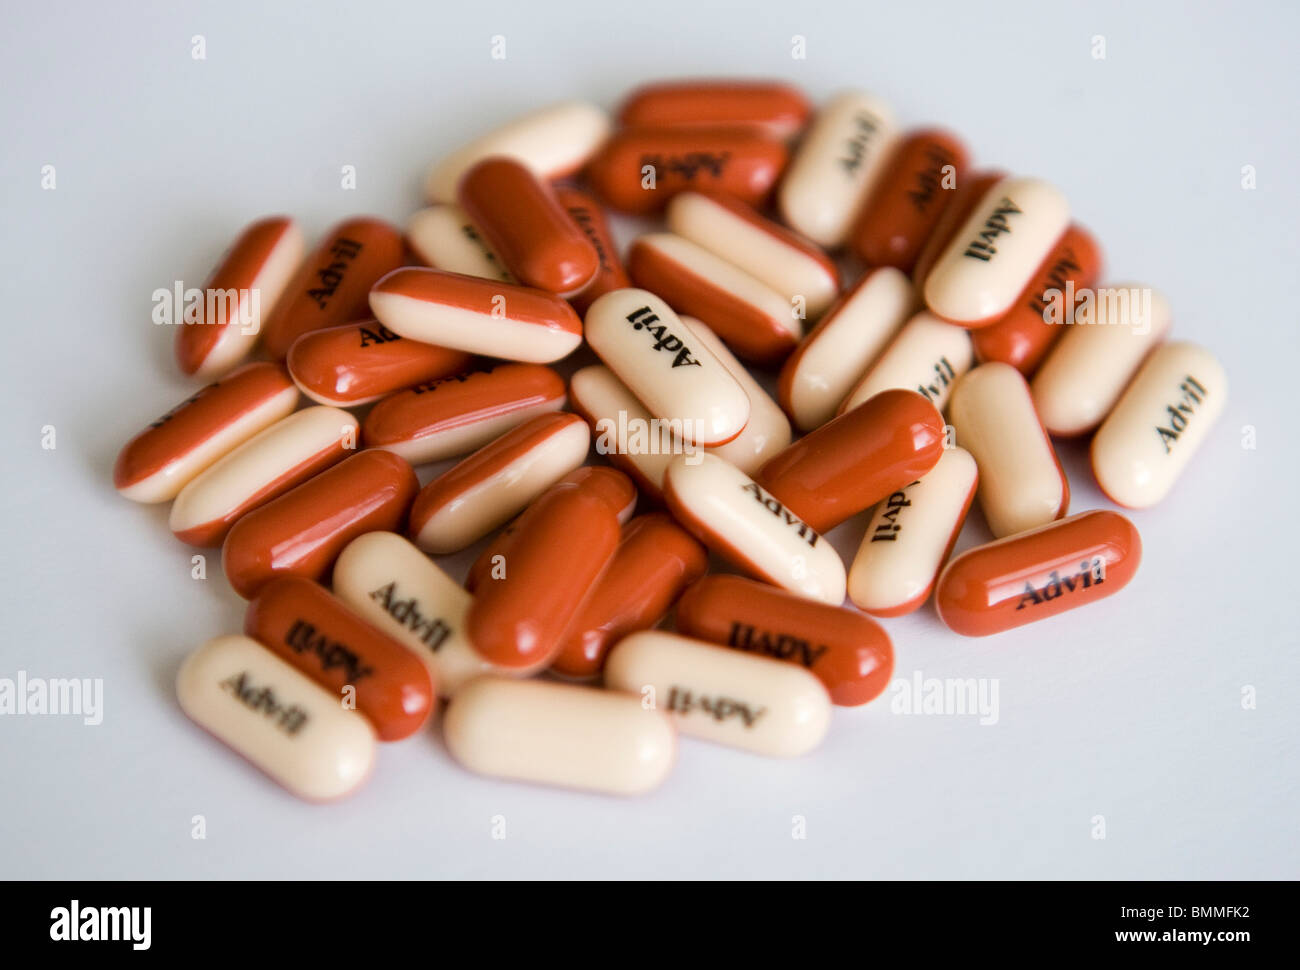 Ibuprofen packaging and pills.  Stock Photo